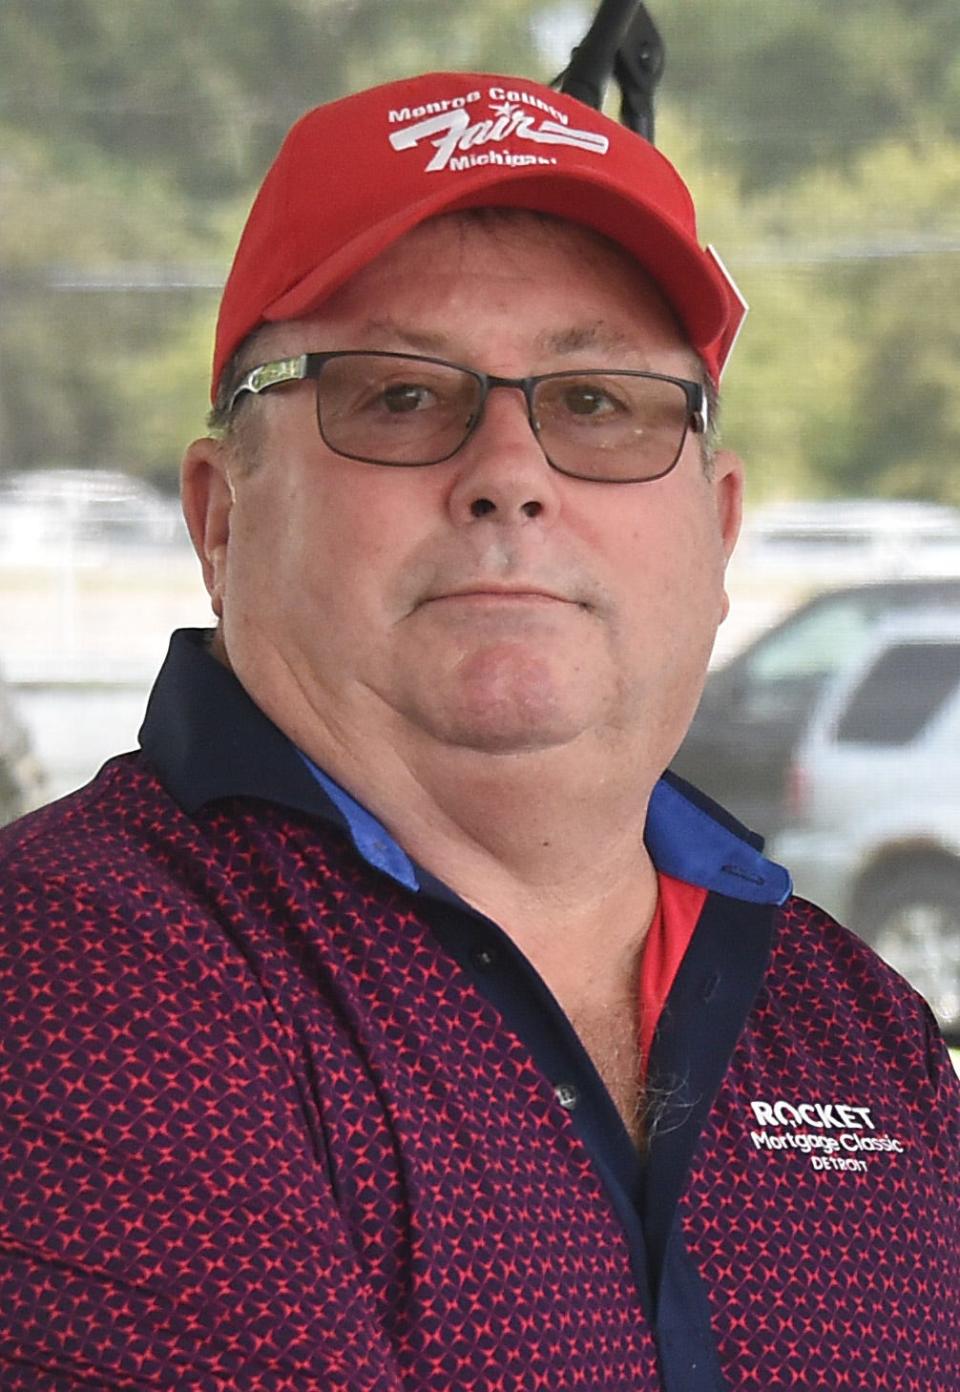 Rick Becker, Monroe County Fair Board member and president of Stoneco and Michigan Paving, was honored Wednesday with a Meritorious Service Award by the Monroe County Fair Association.